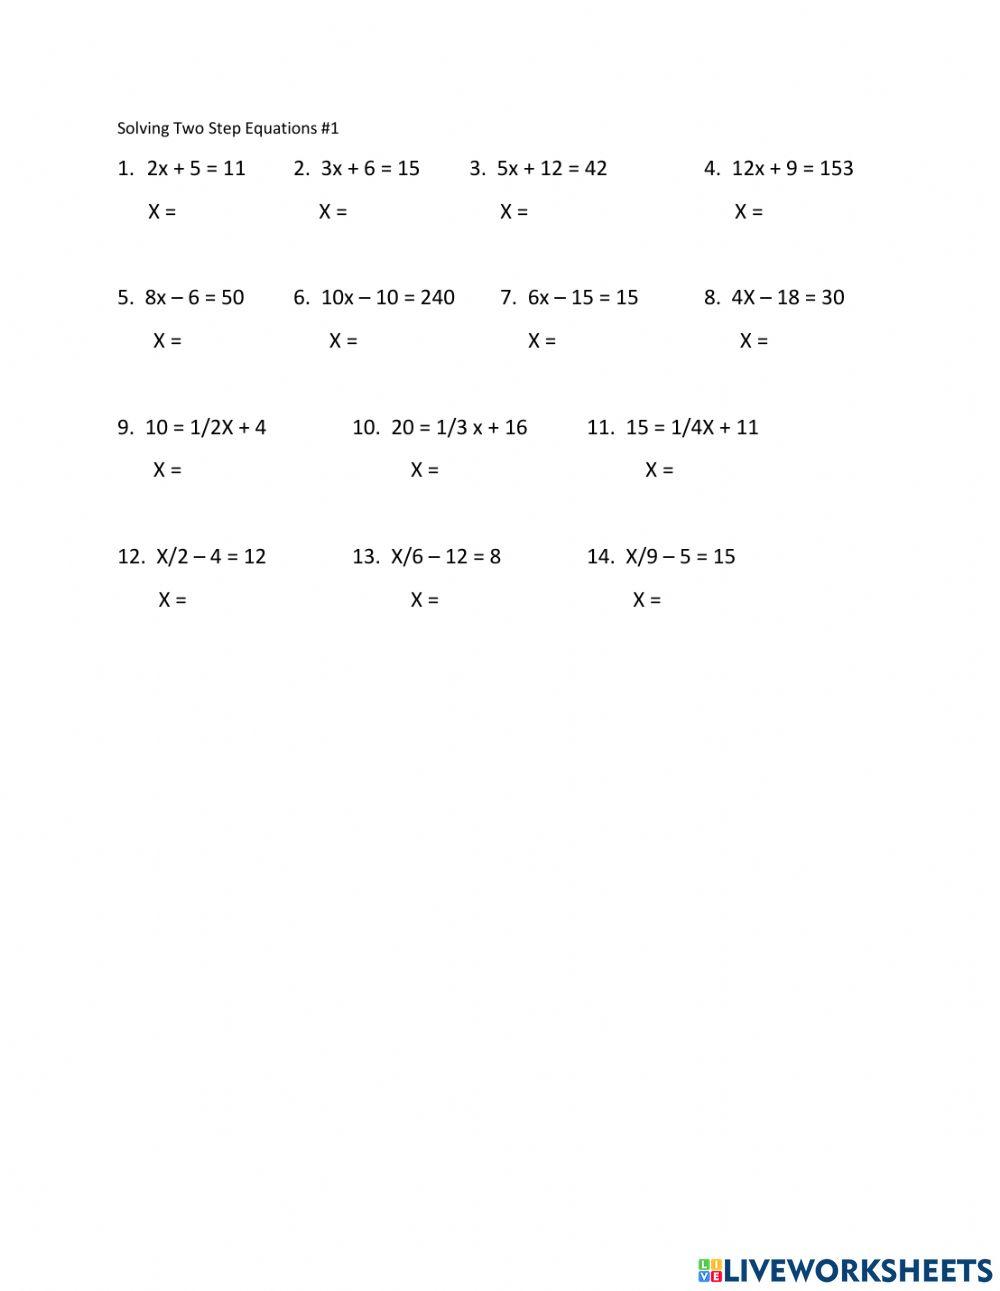 Sole two step equations -1